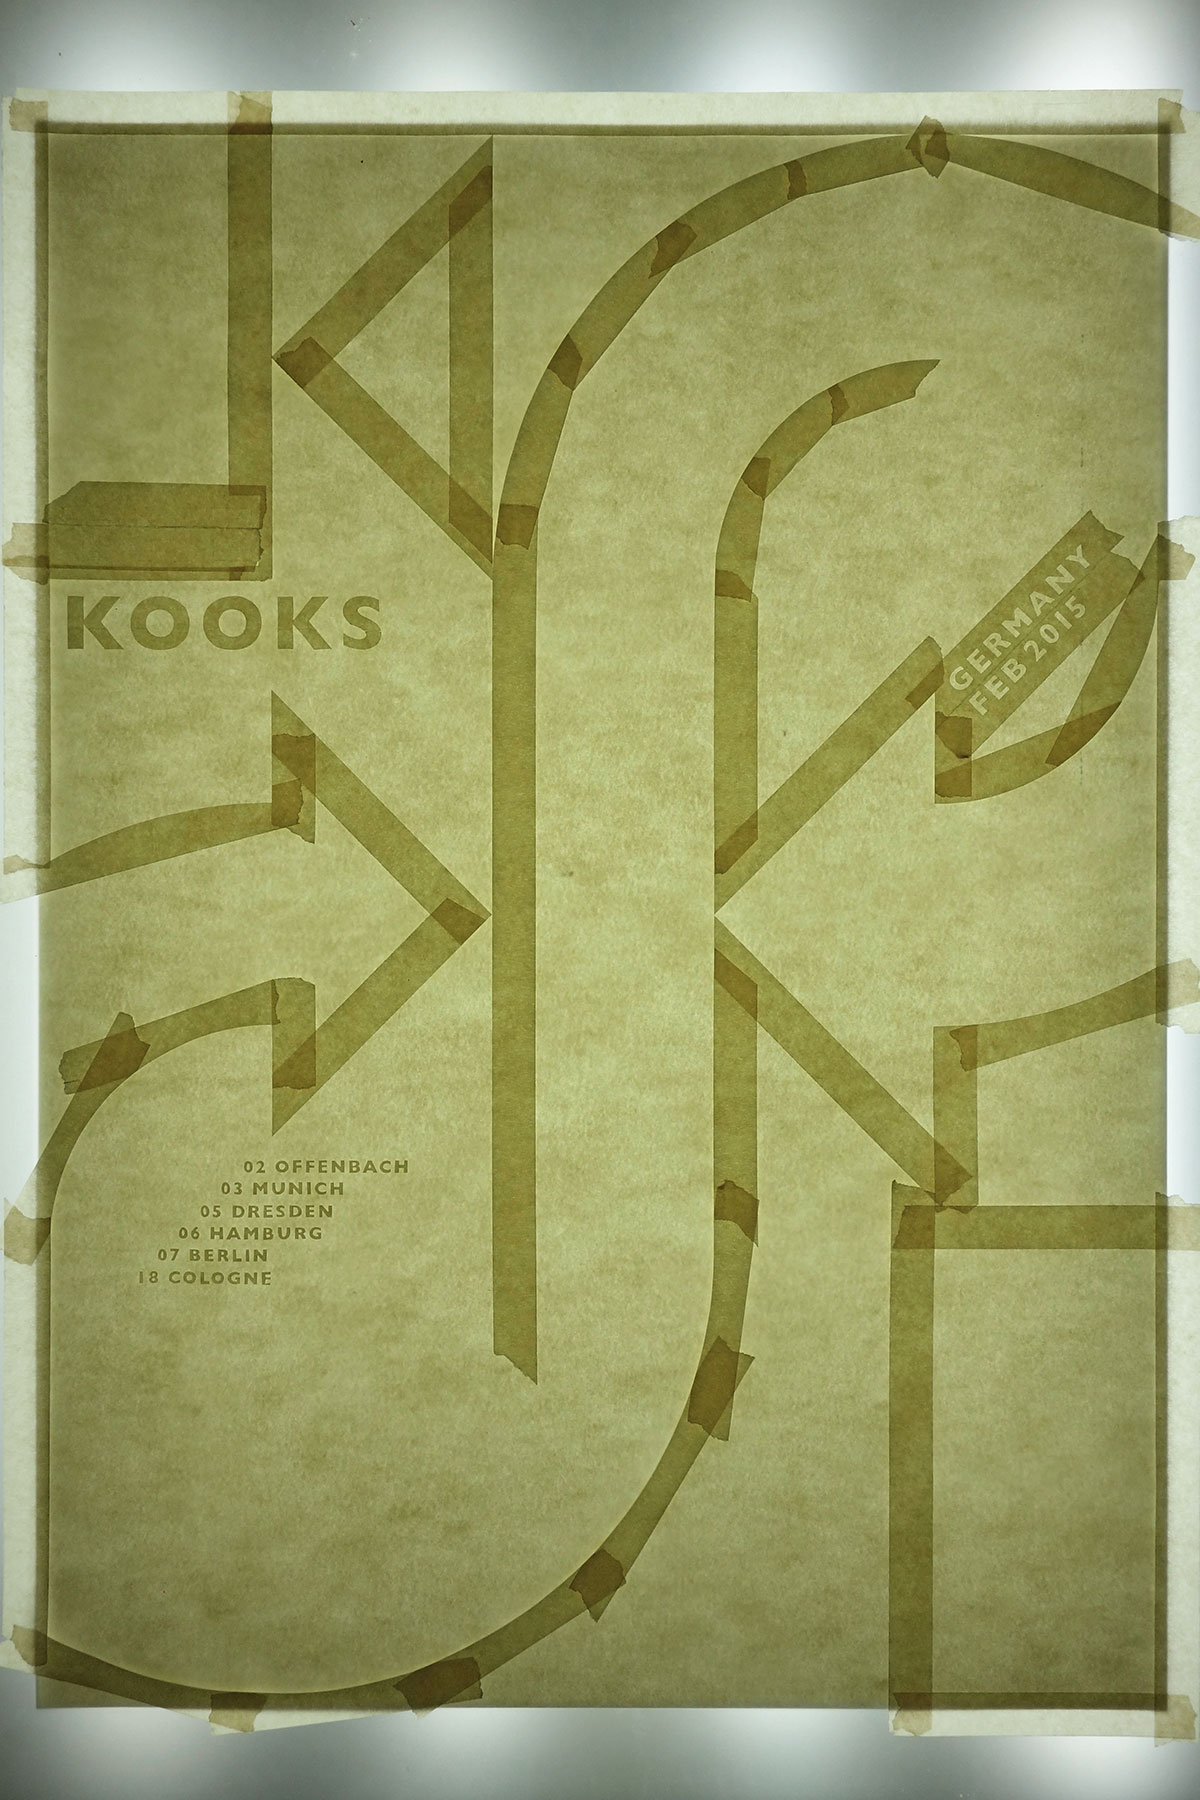 The Kooks gigposter process 01 by Rainbow Posters